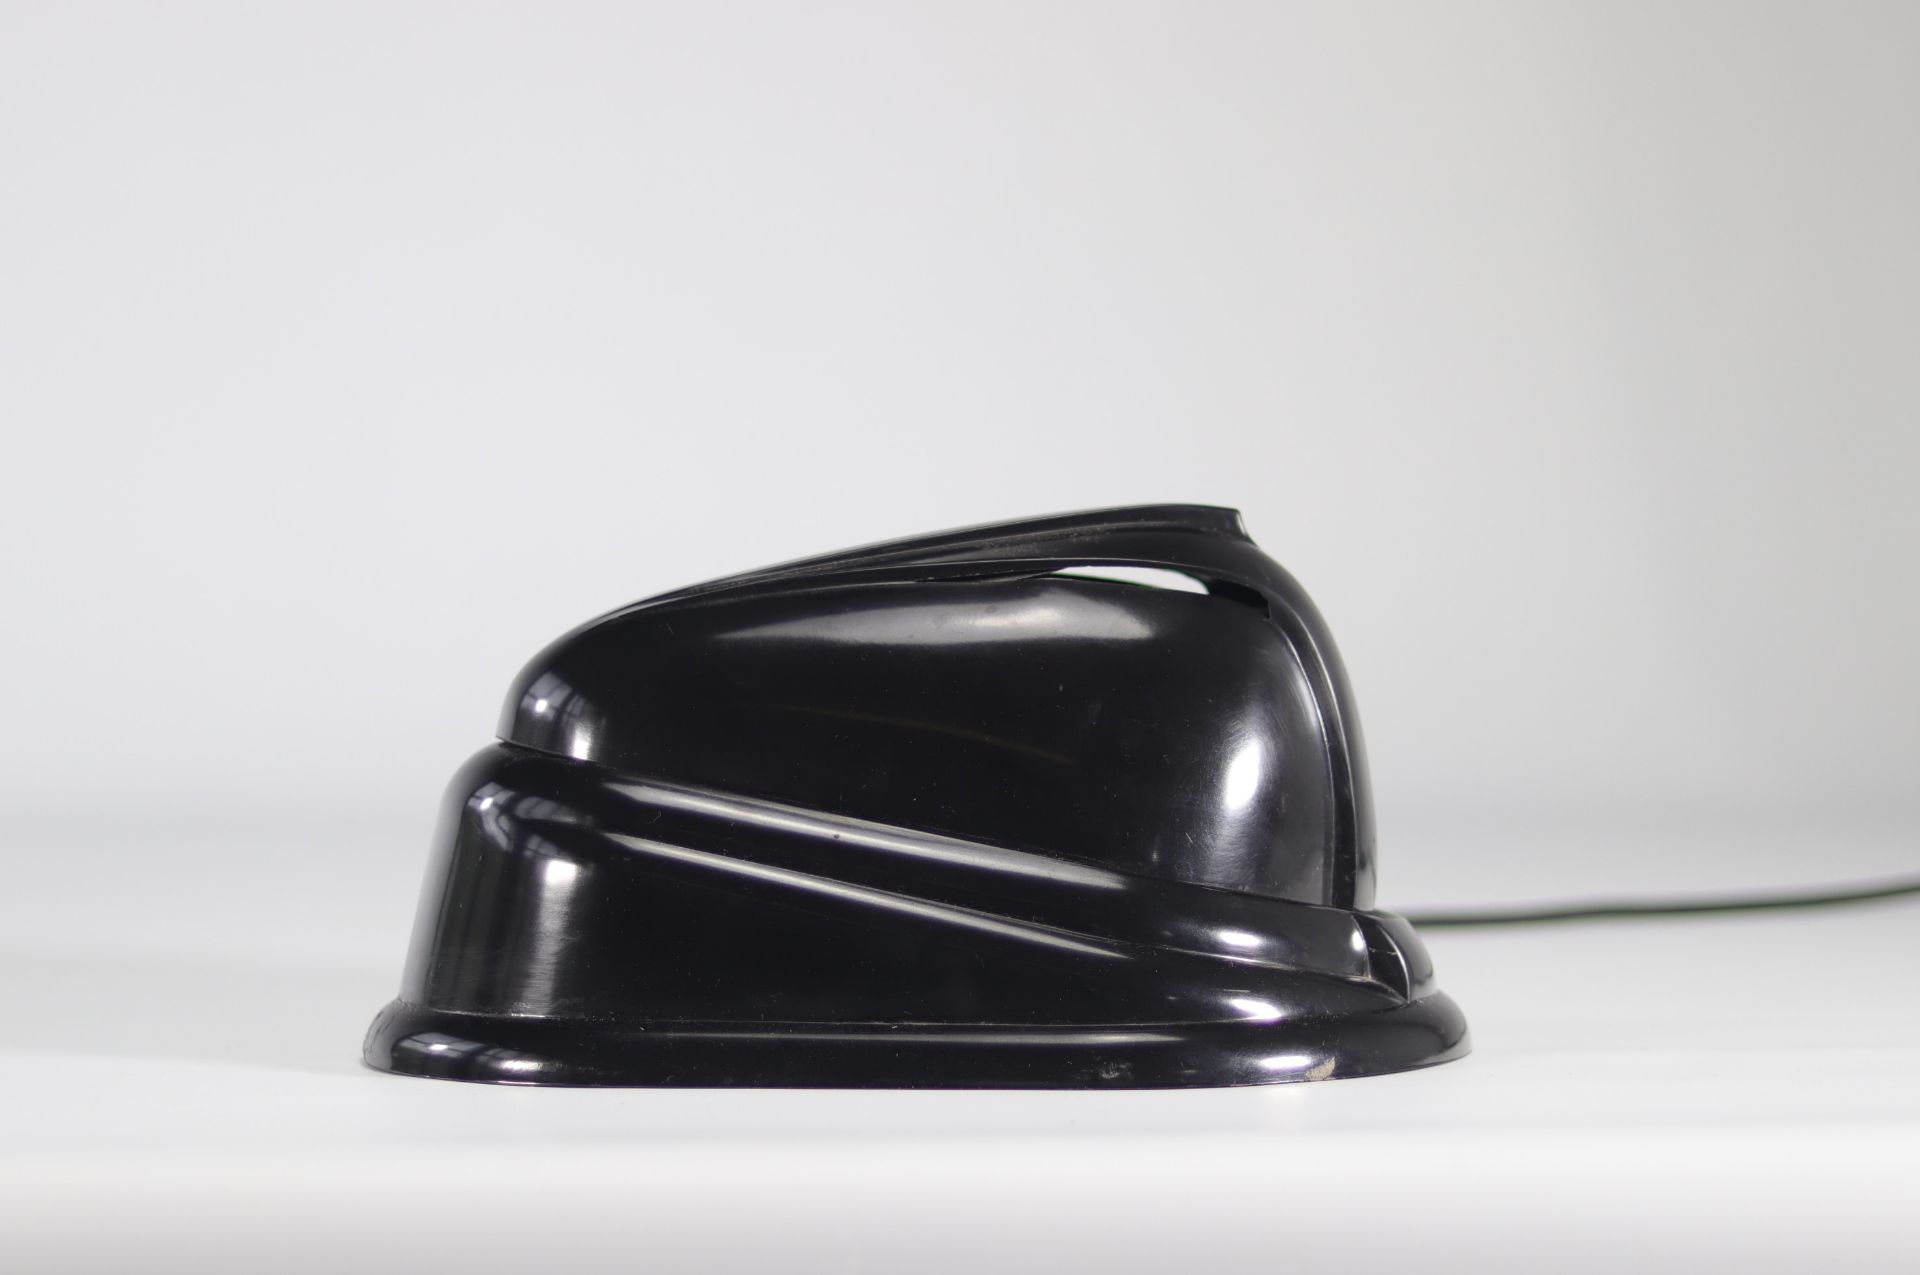 Jumo Articulated desk lamp with adjustable and retractable cap, bakelite model called "Bolide" - Image 3 of 3